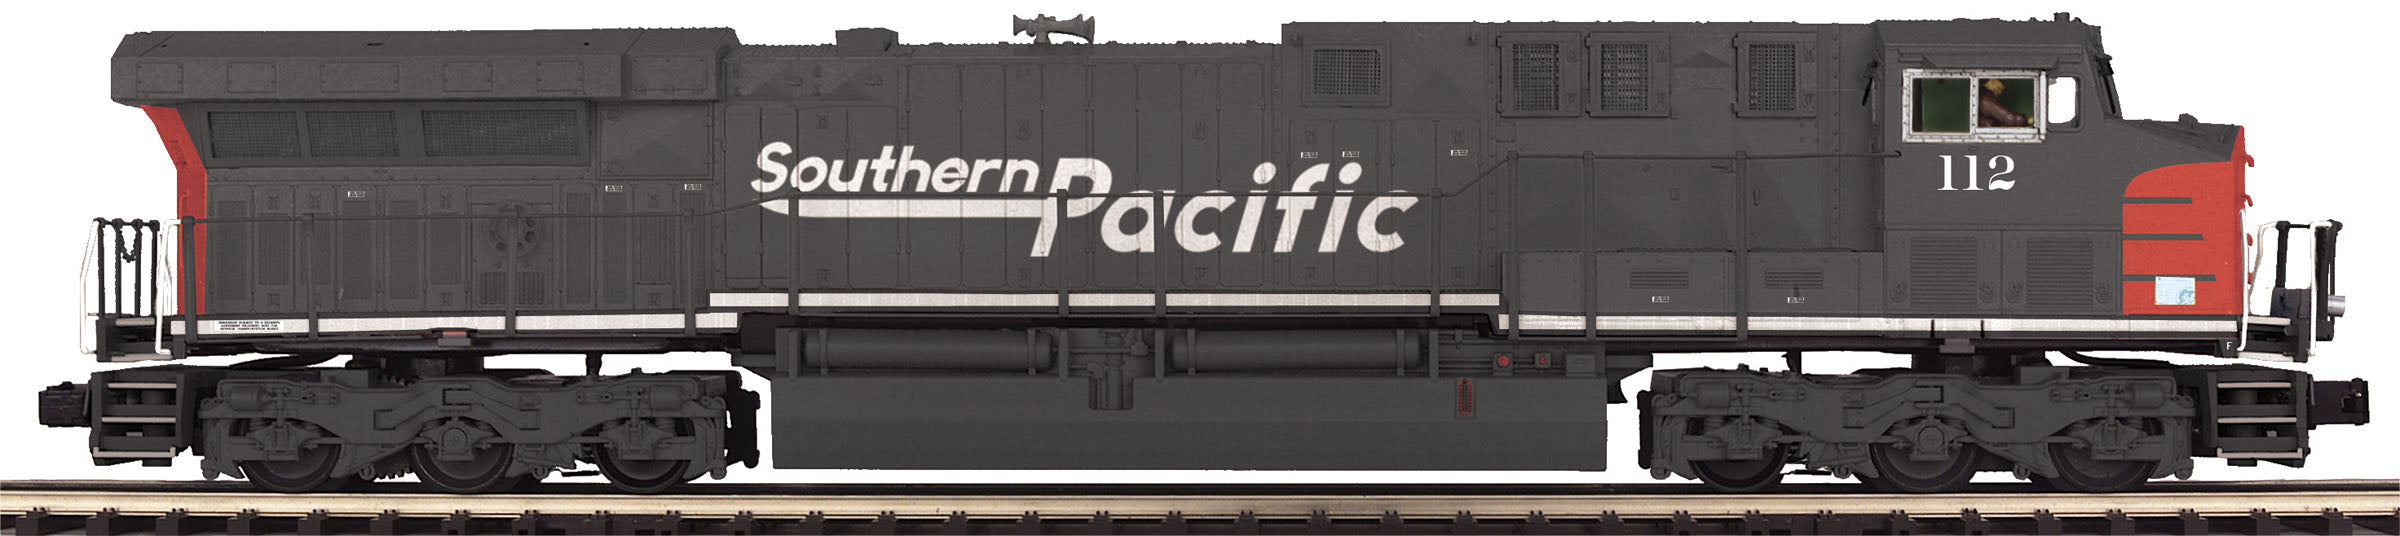 MTH 20-21904-1 - AC6000 Diesel Engine "Southern Pacific" #136 w/ PS3 - Custom Run for MrMuffin'sTrains